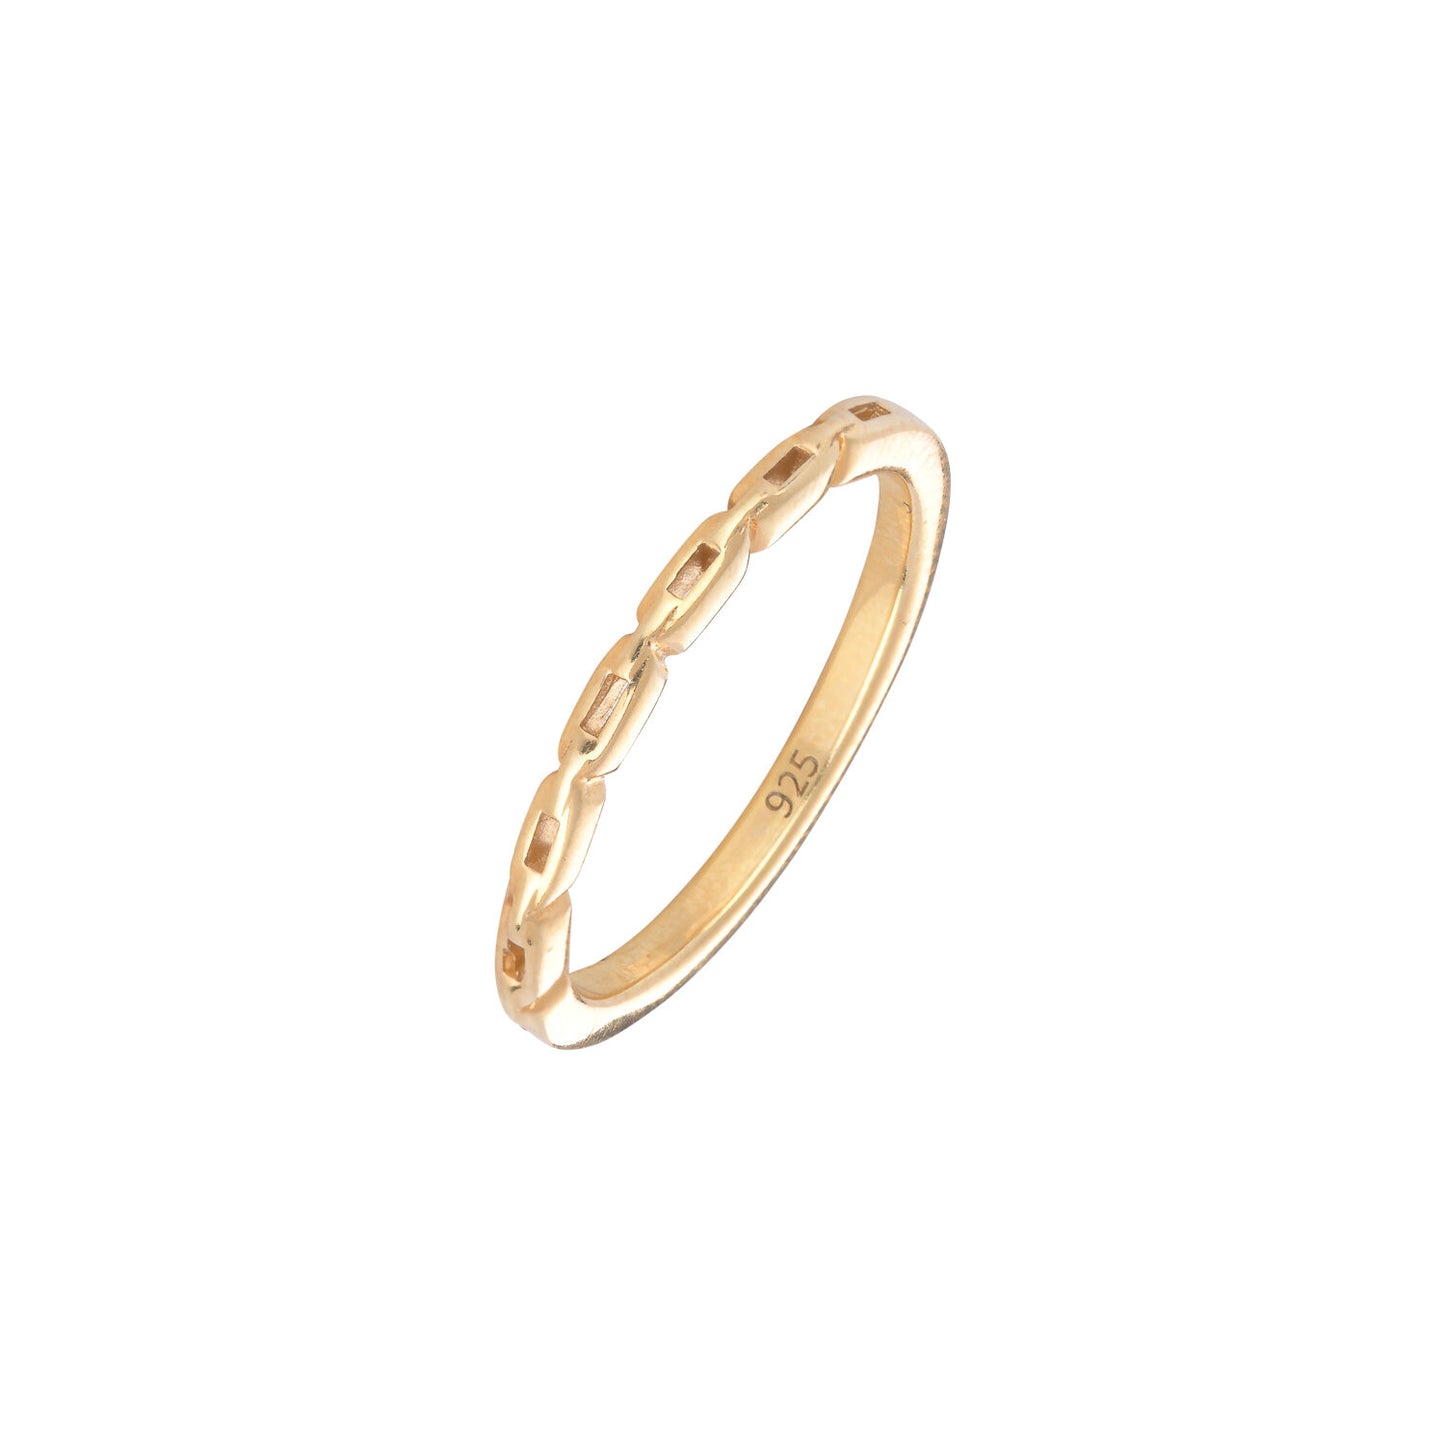 Thin Chain Ring - Gold Plated